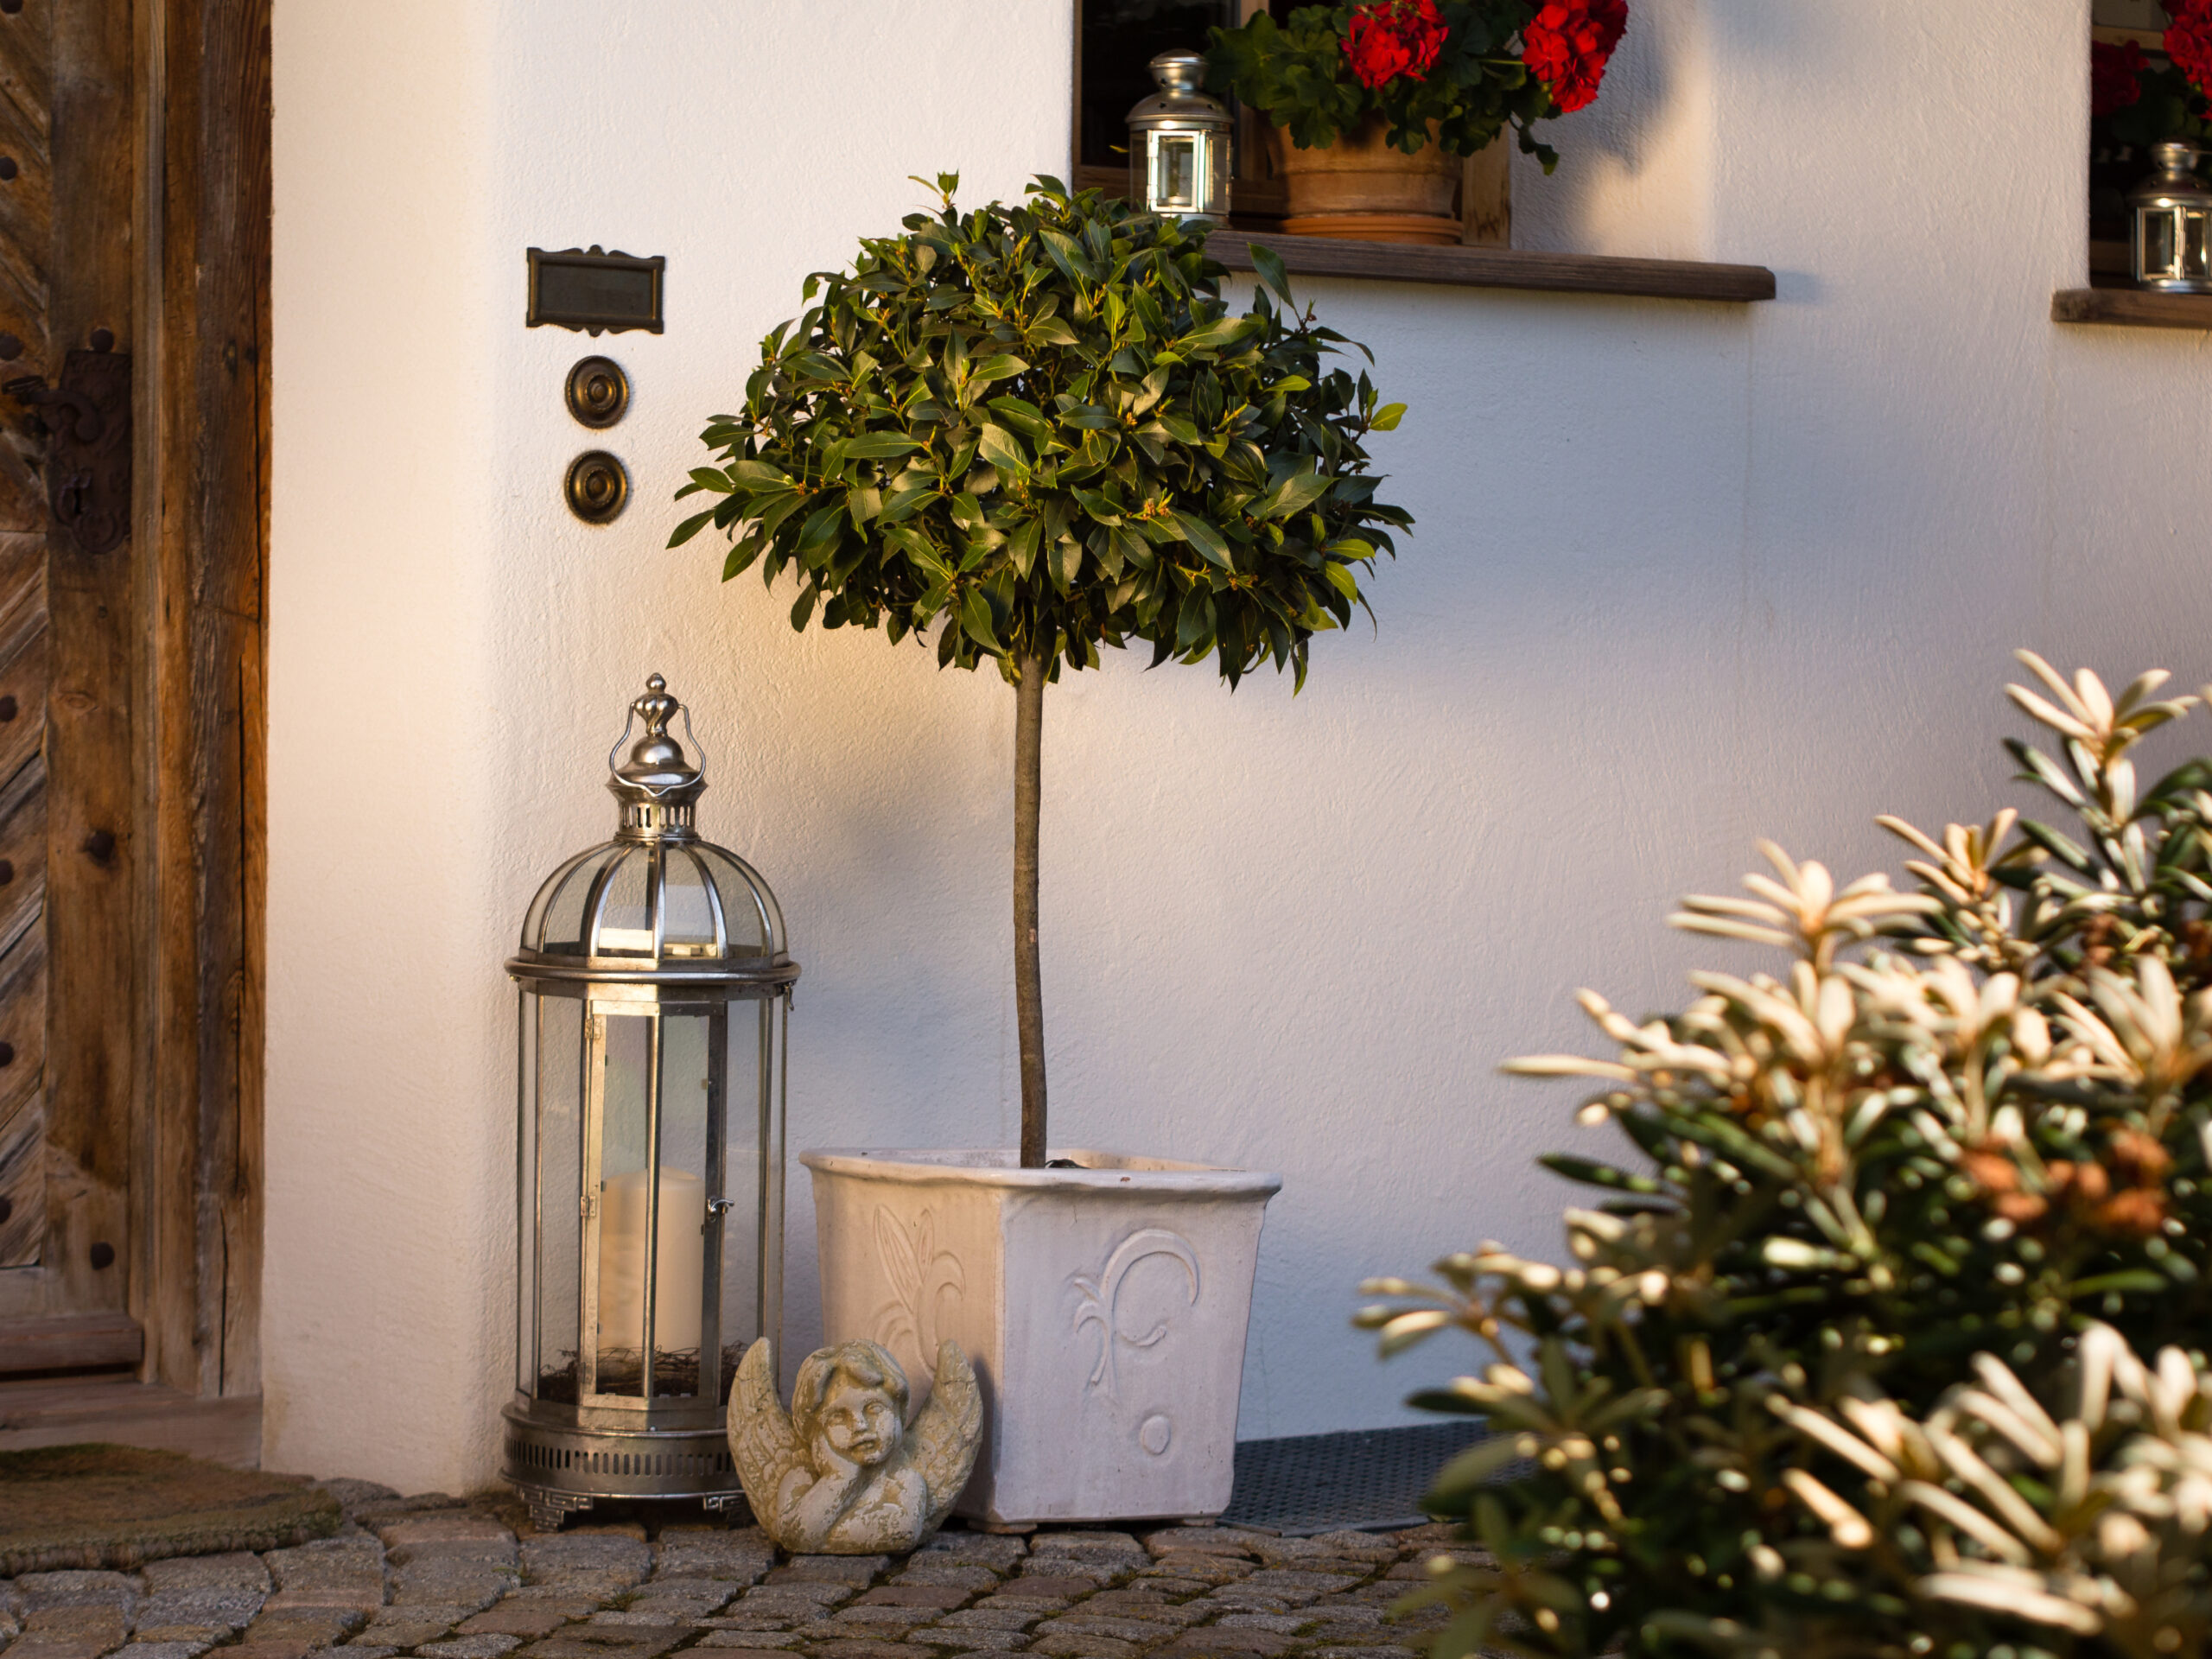 A standard, lollip-pop-shaped bay tree is pictured in a white planter beside and silver lantern and sculpture beside a front door